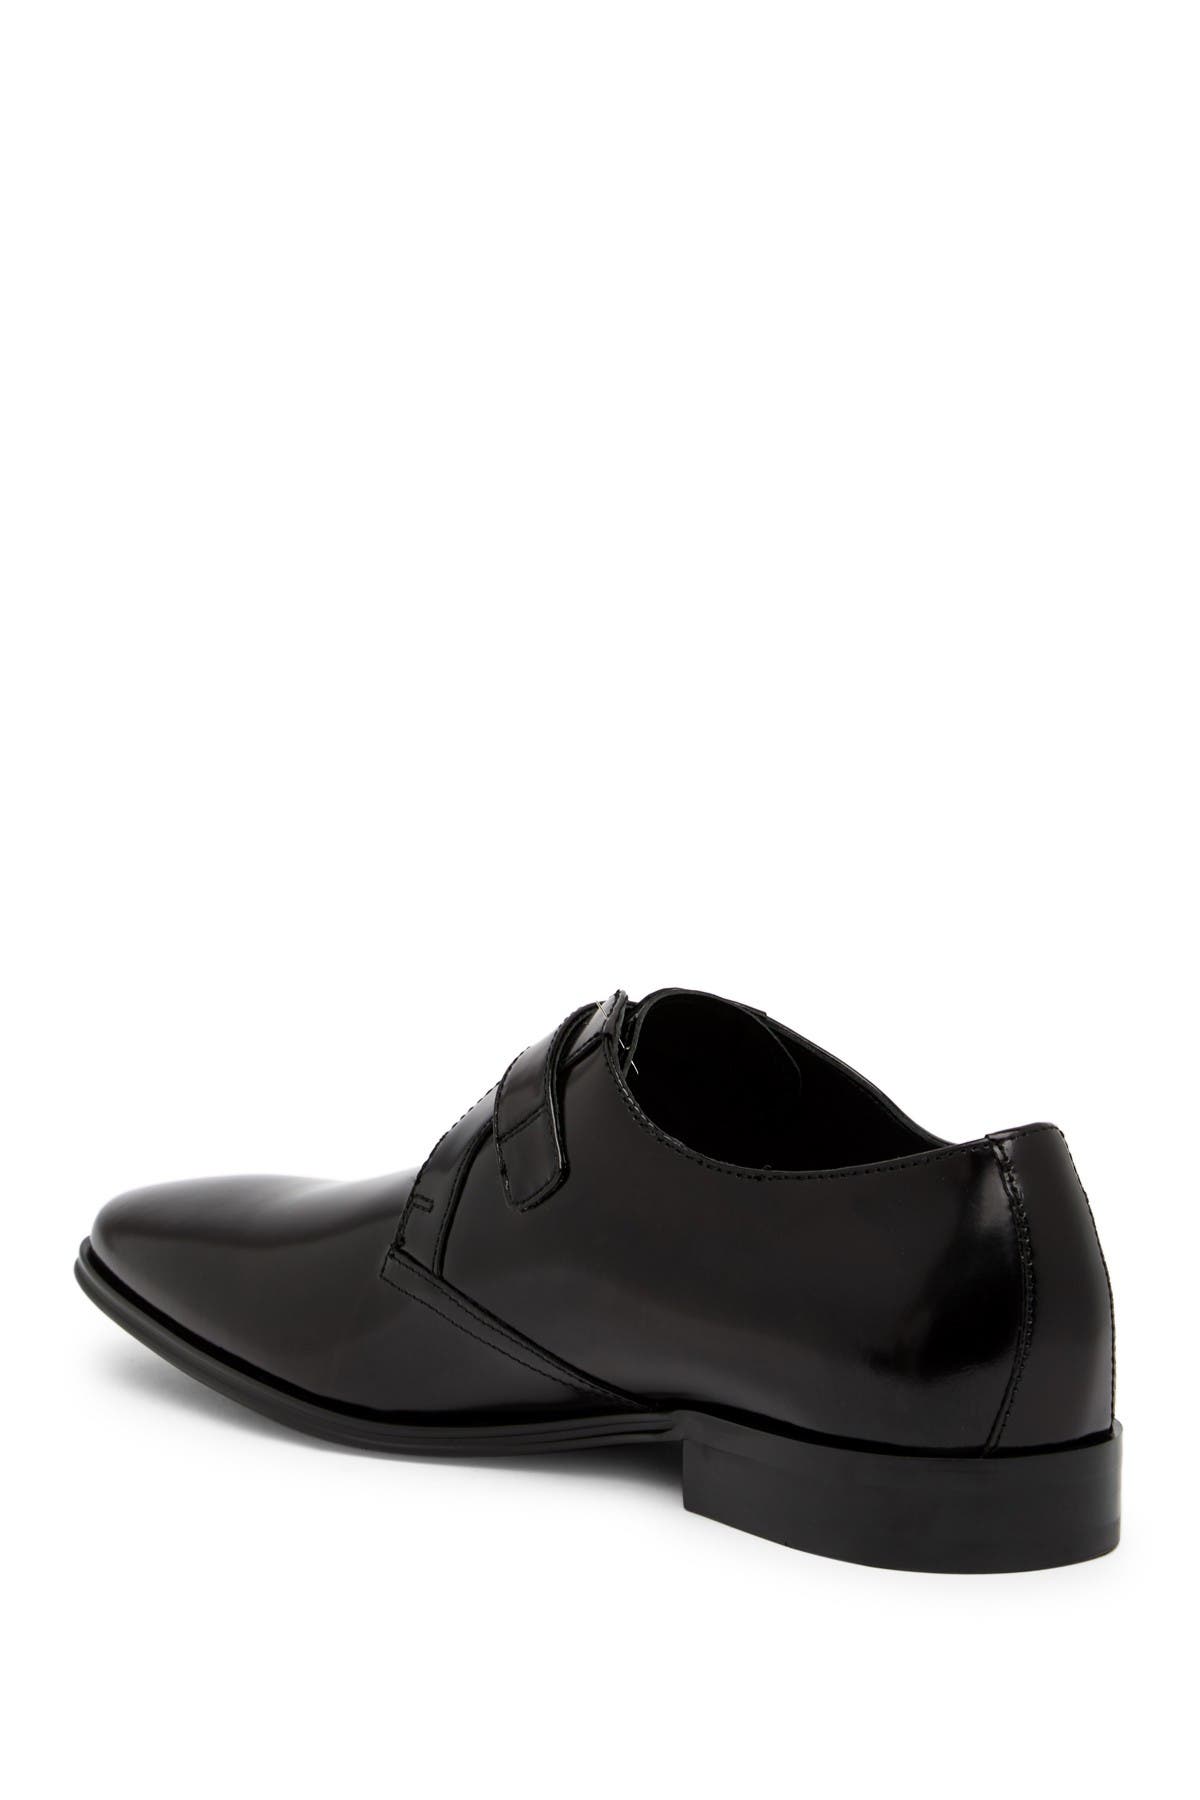 versace spazzolato leather monk strap loafer